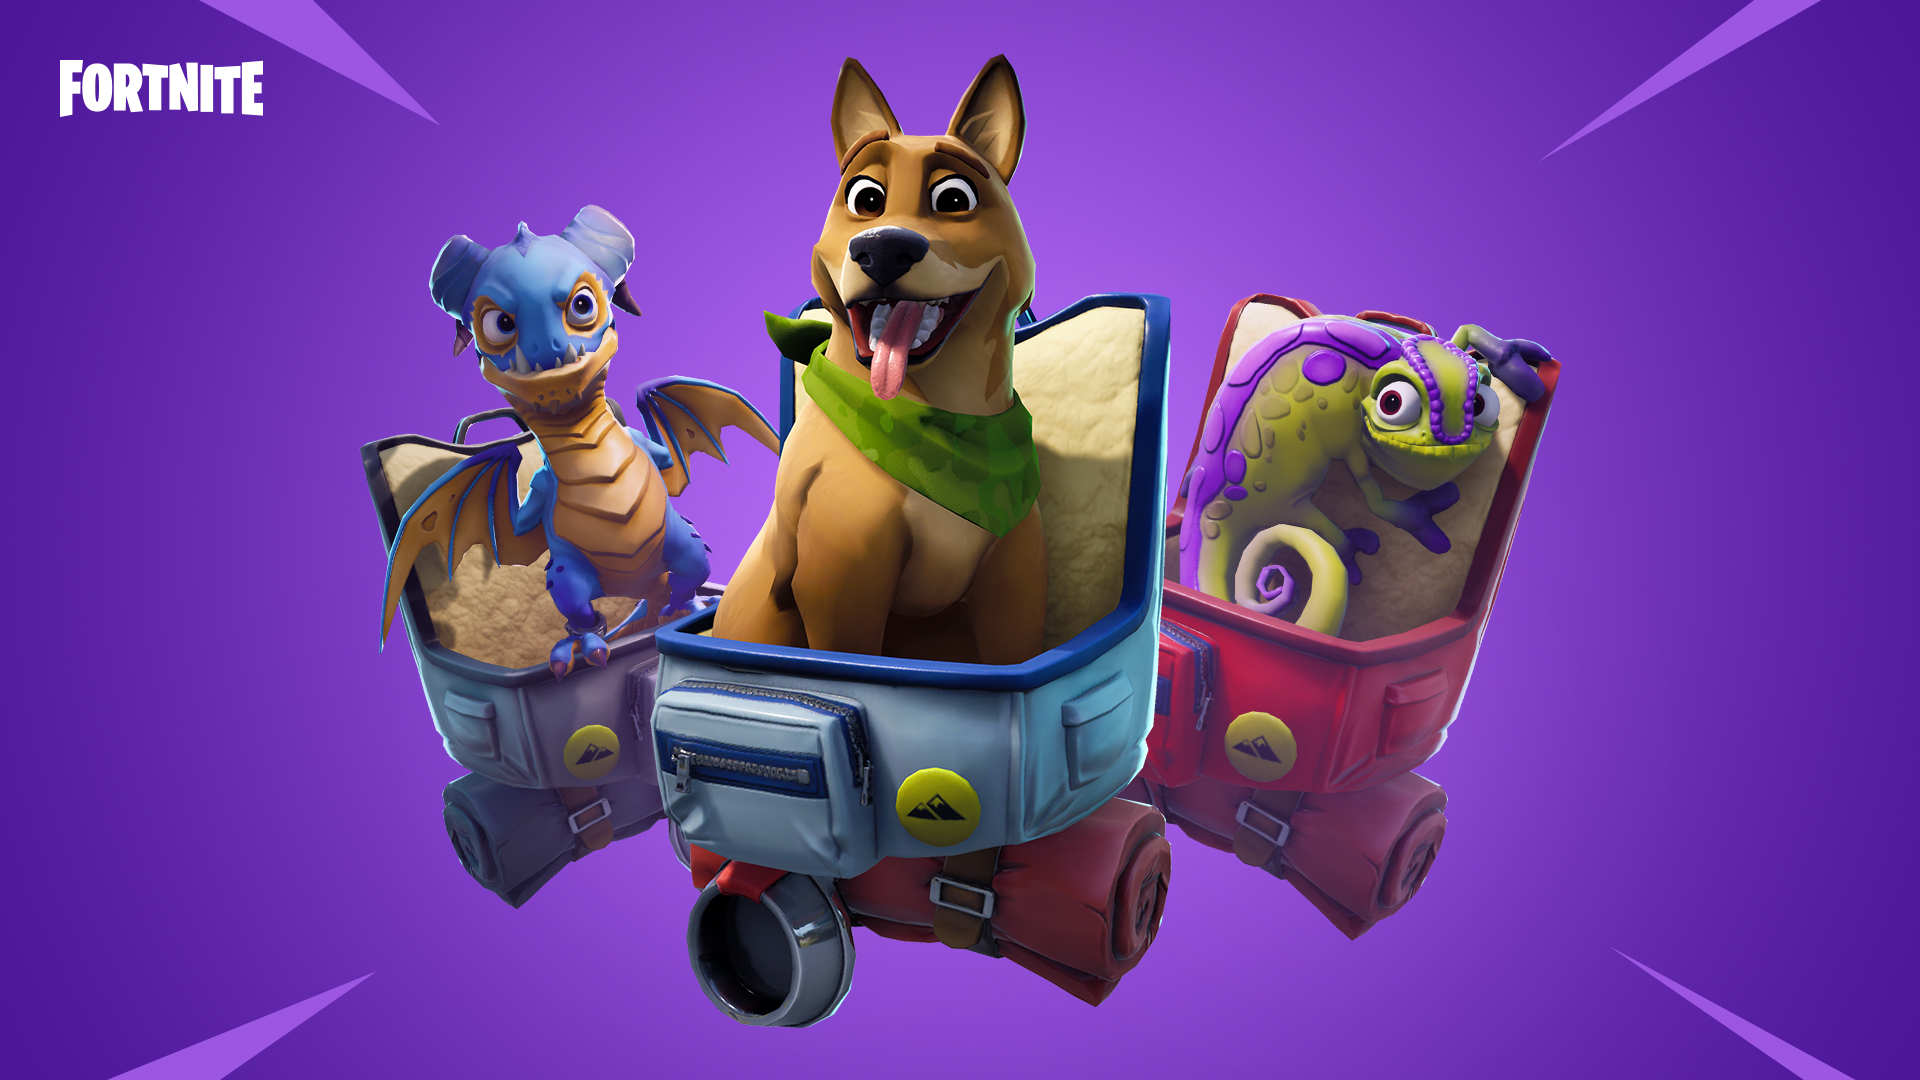 Fortnite Pets Explained What Are They How Do They Work And - fortnite pets explained what are they how do they work and who s a good boy